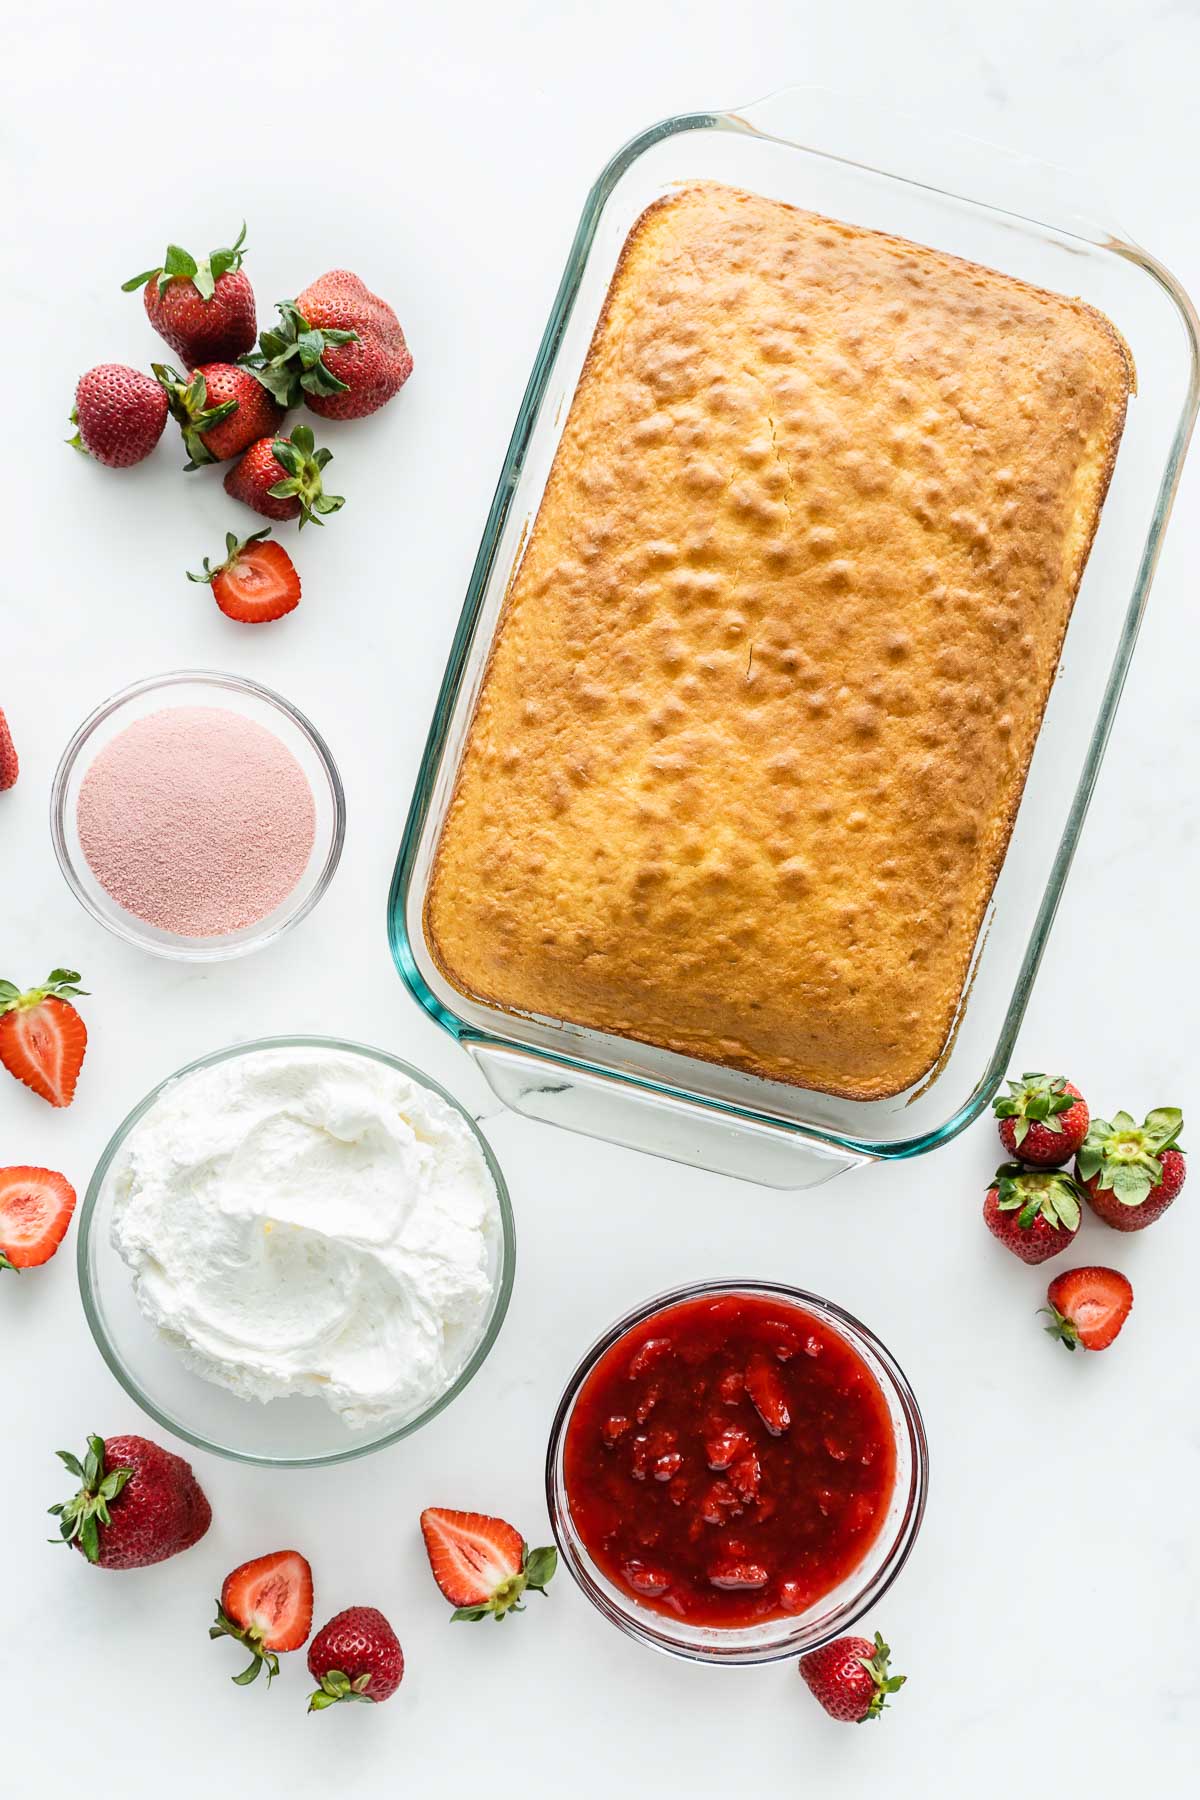 rectangle glass baking dish with white cake and three glass bowls with strawberries, whipped cream and jello mix powder